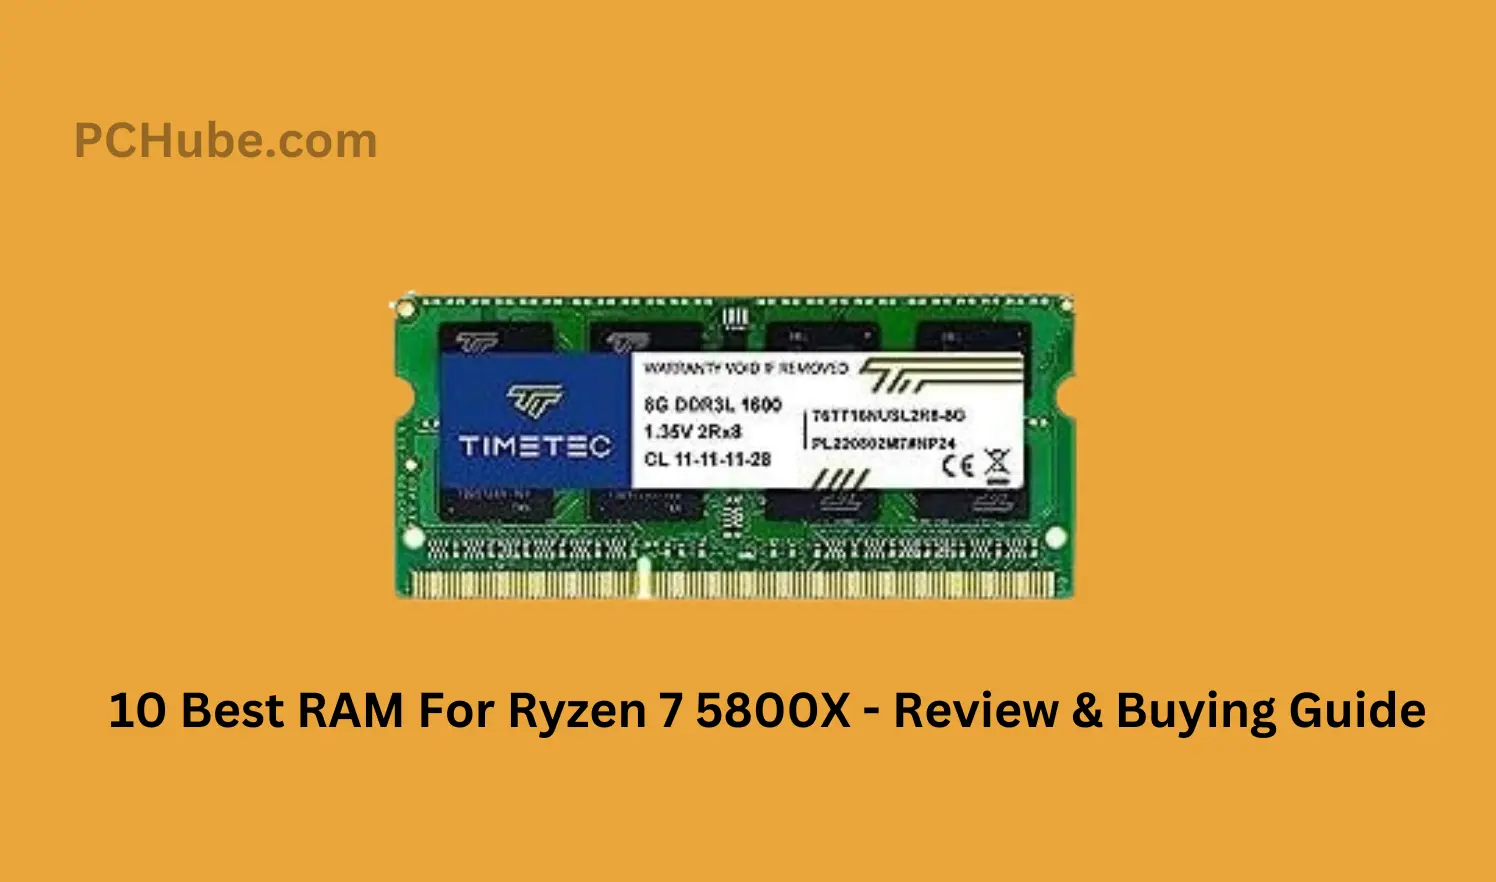 10 Best RAM For Ryzen 7 5800X - Review & Buying Guide